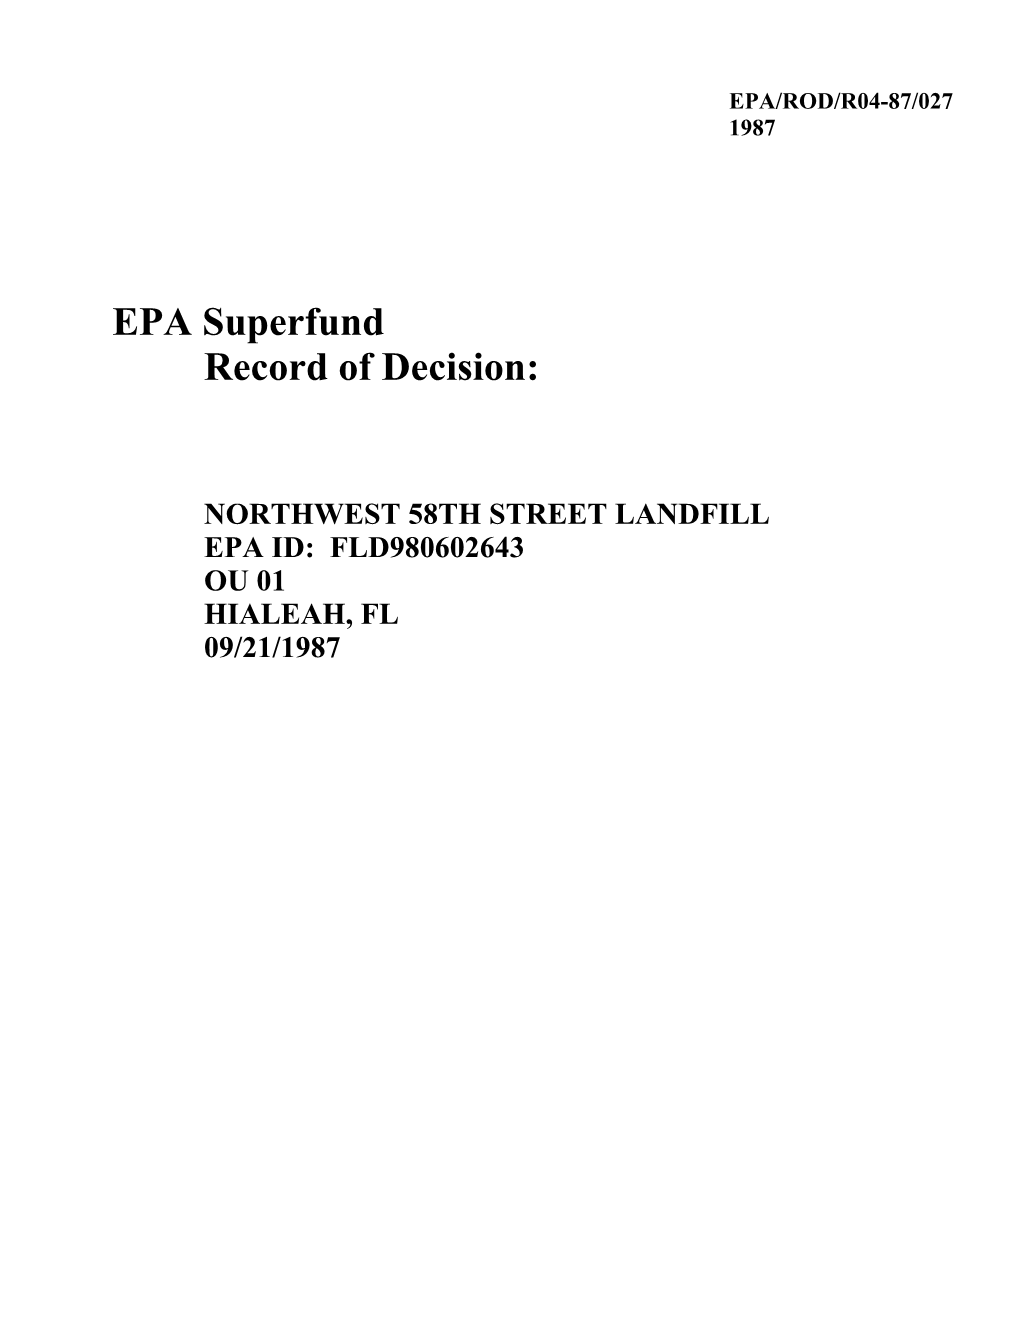 Northwest 58Th Street Landfill Epa Id: Fld980602643 Ou 01 Hialeah, Fl 09/21/1987 1) 1975 United States Geological Service Groundwater Quality Study